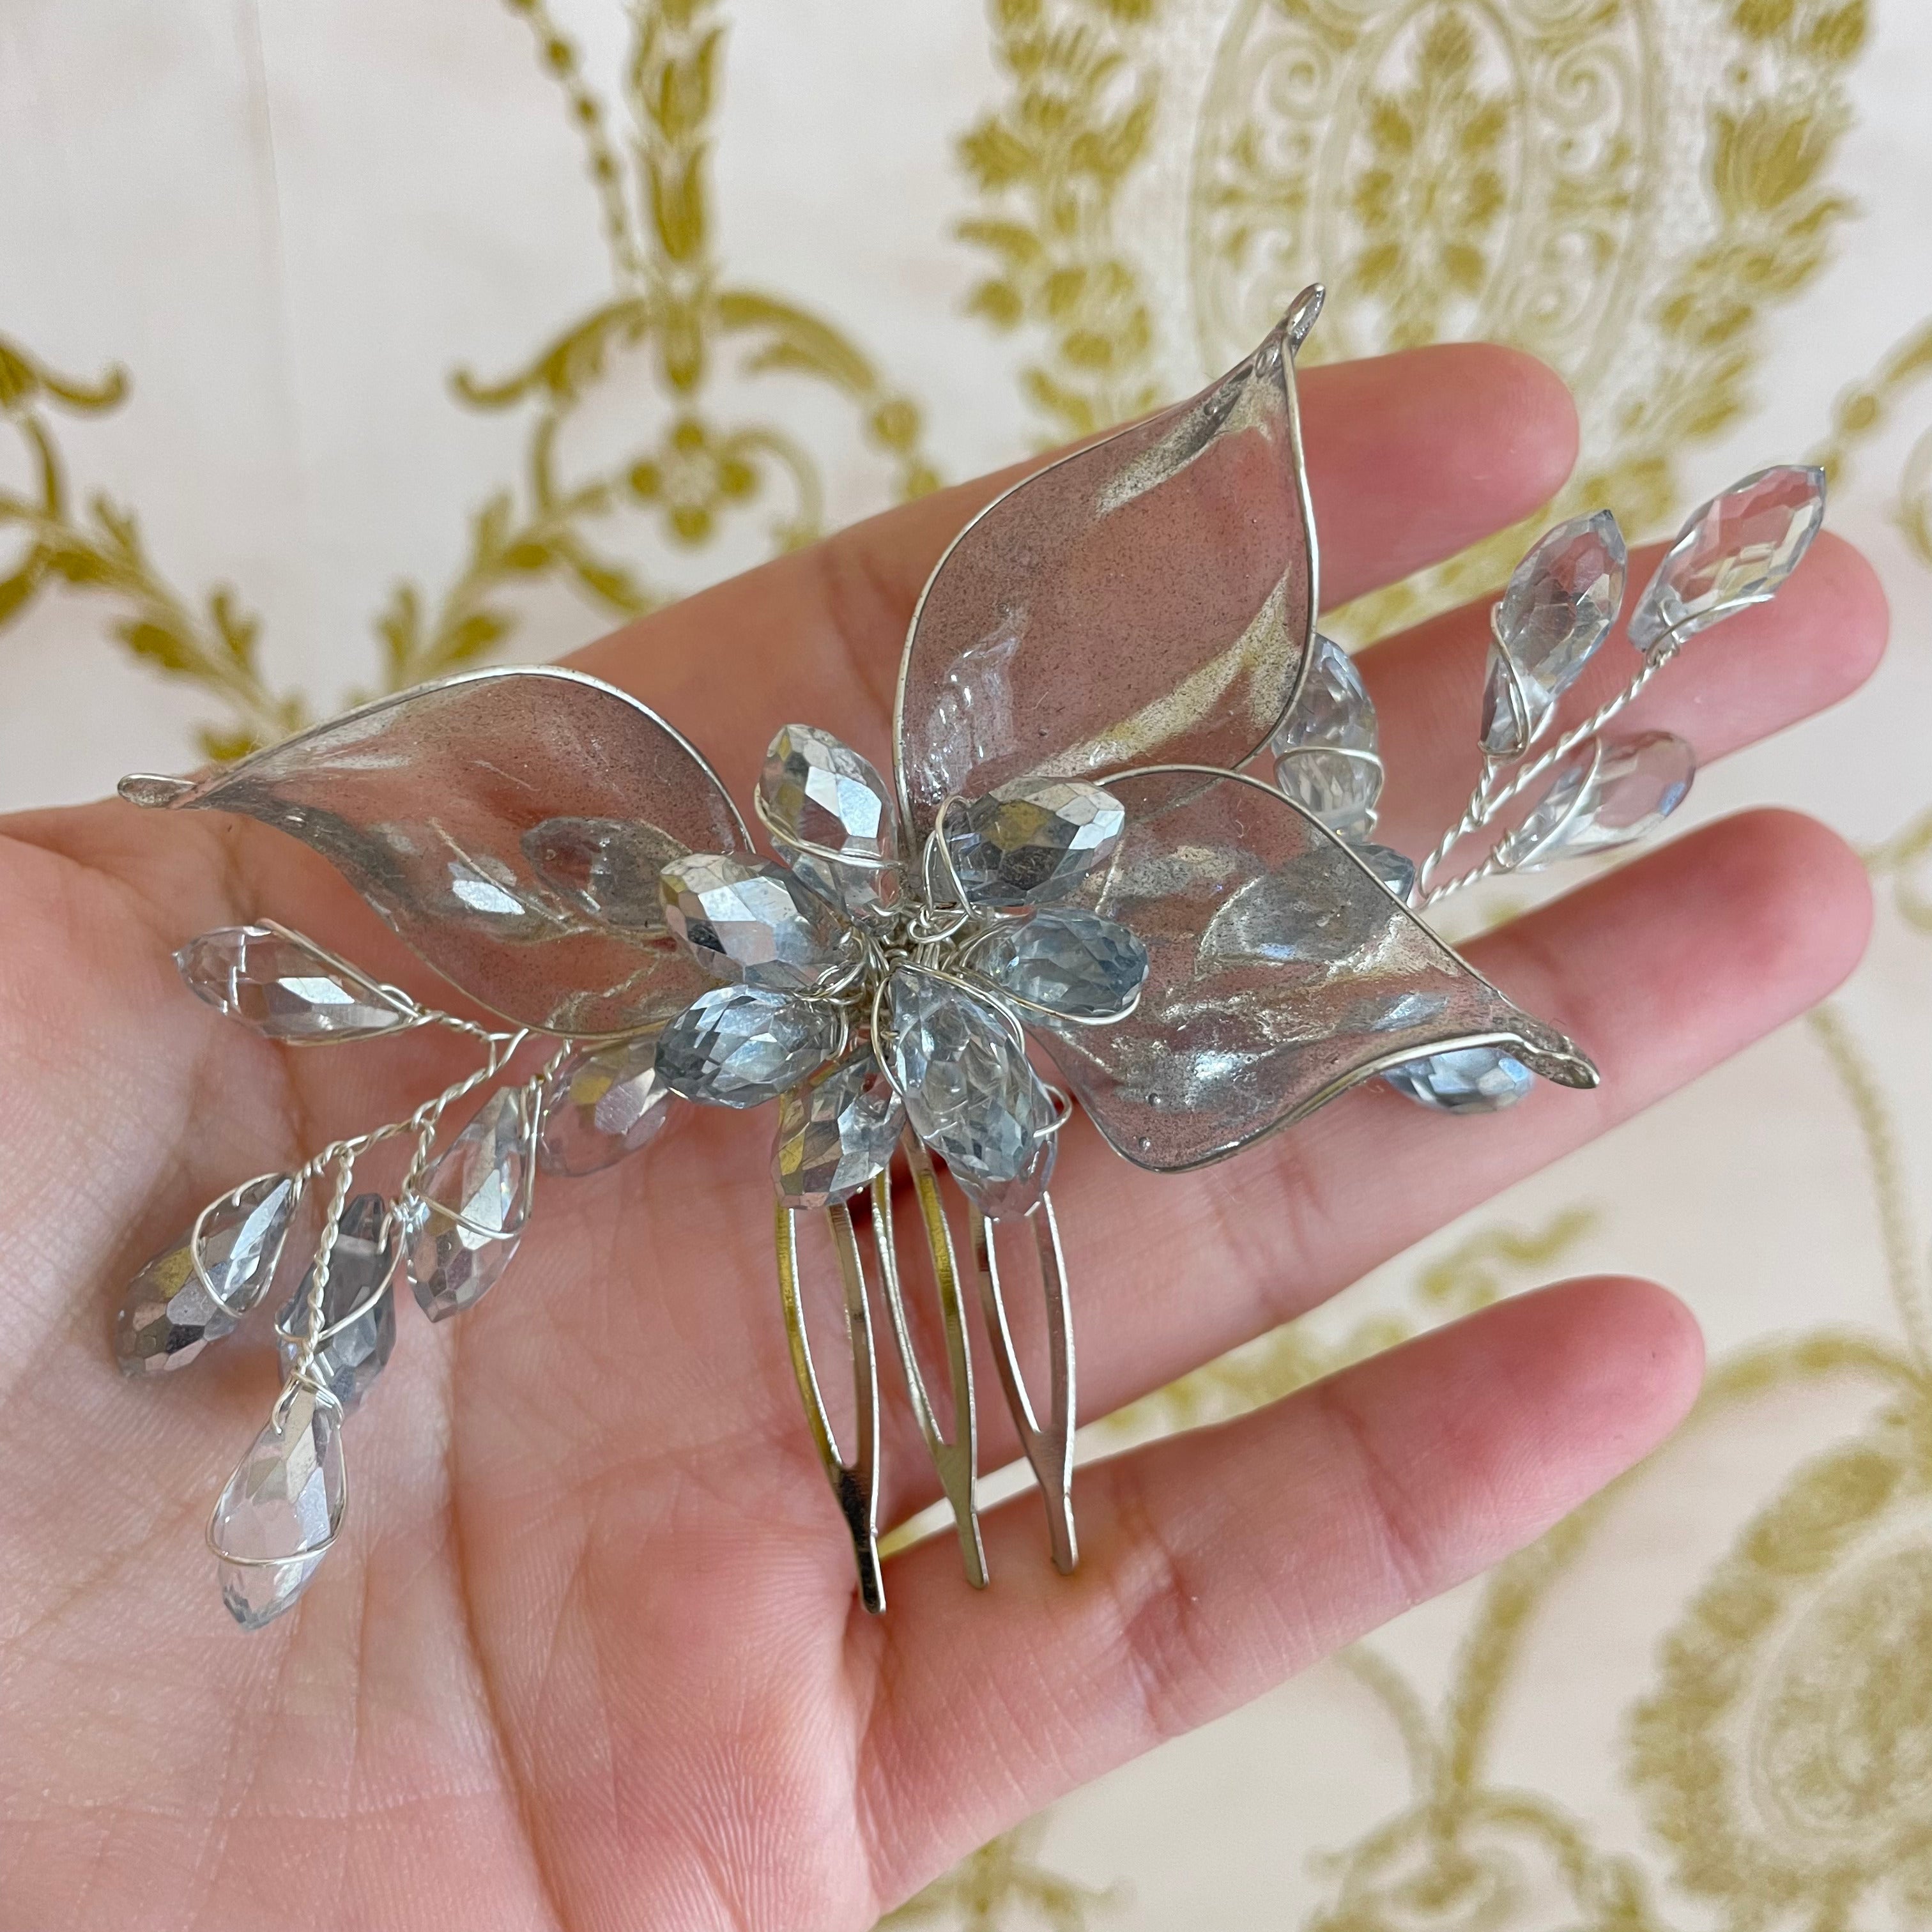 Small silver hair comb